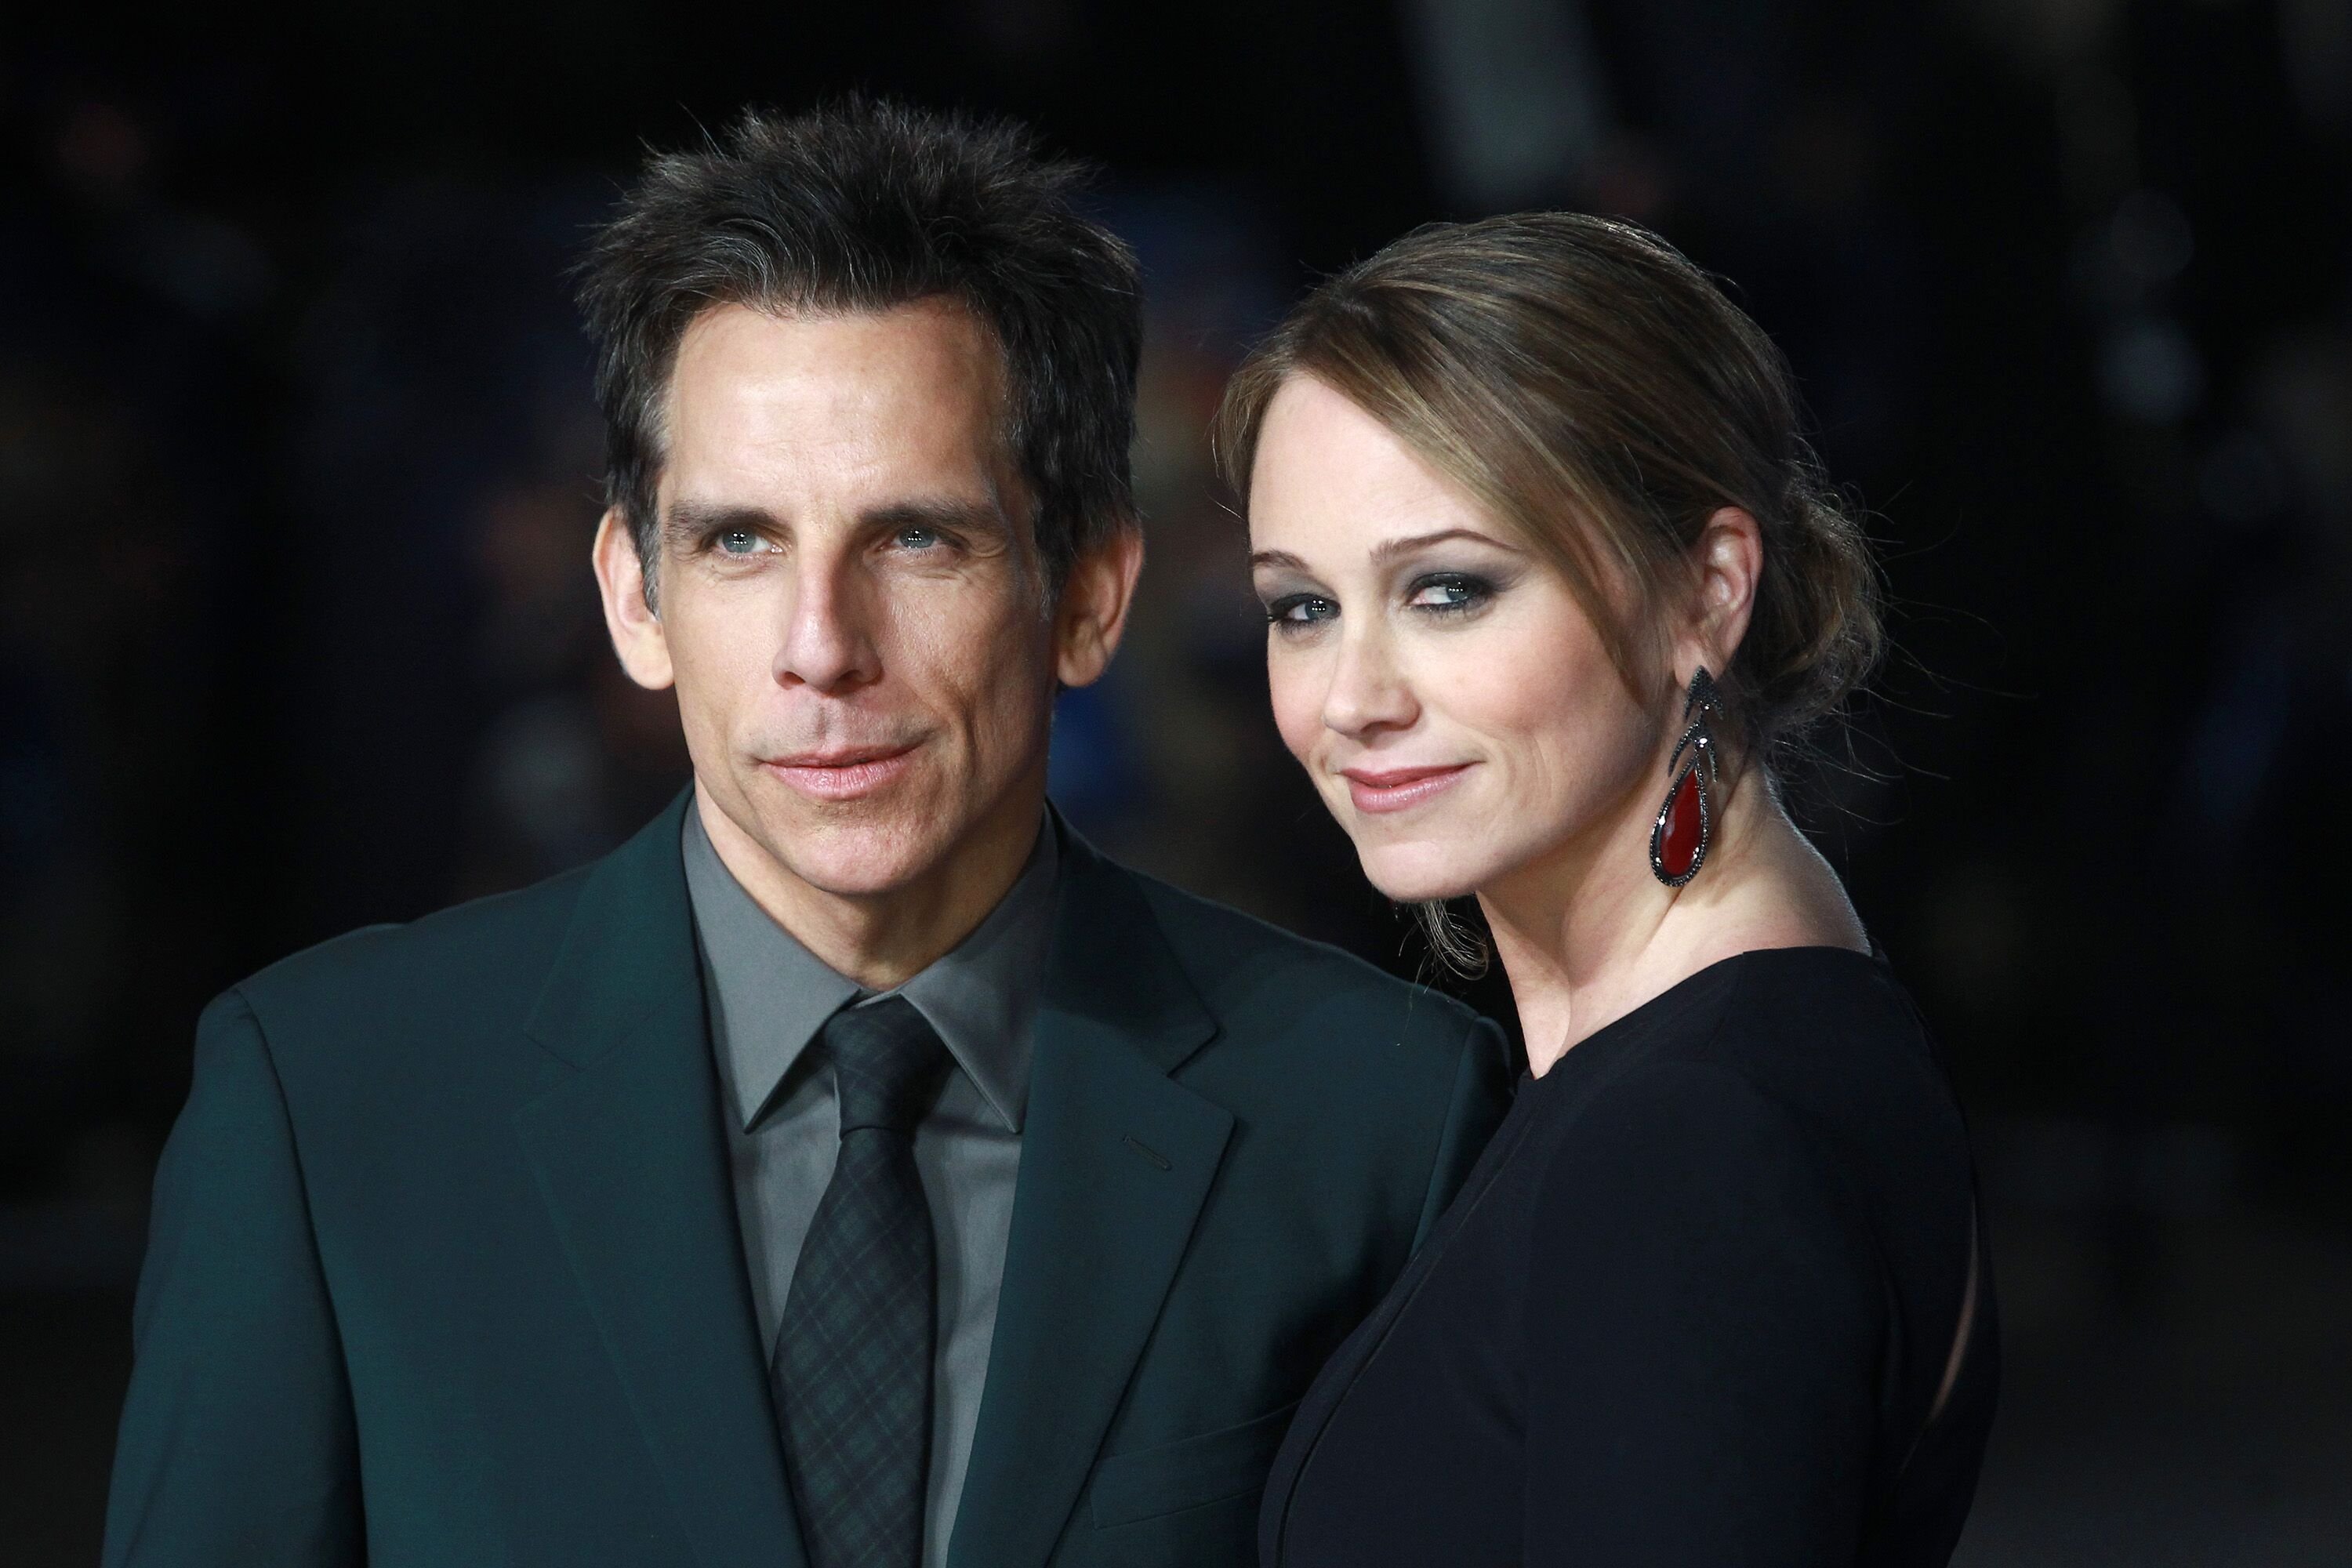 Ben Stiller and Christine Taylor attends the UK Premiere of "Night At The Museum: Secret Of The Tomb" at Empire Leicester Square on December 15, 2014 in London, England. | Source: Getty Images